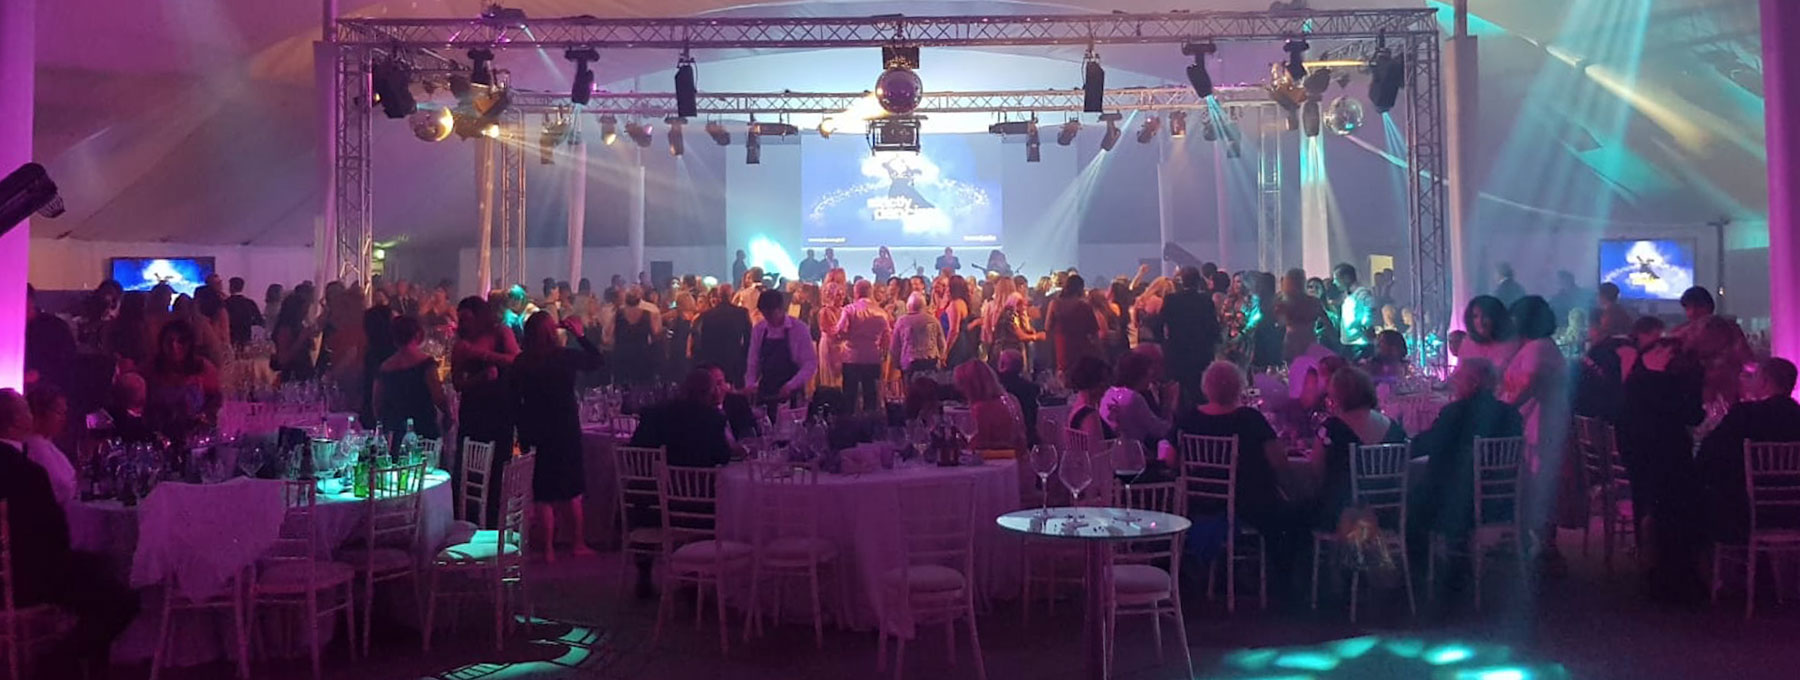 Corporate Venue Hire - Essex - Chigwell Marquees